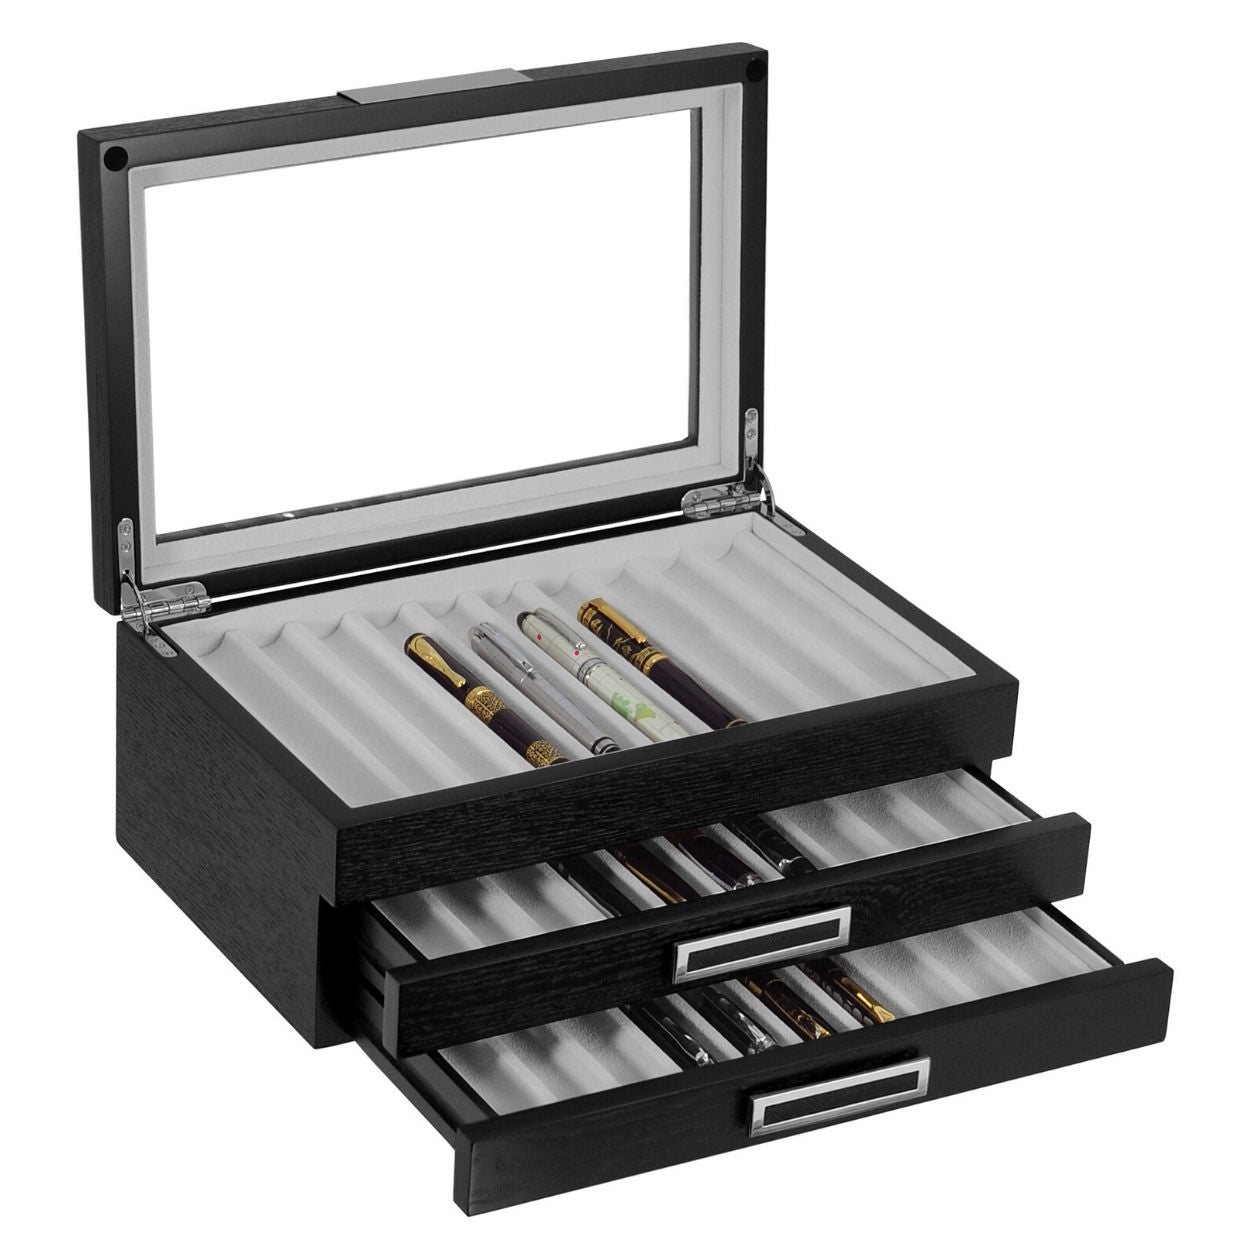 TIMELYBUYS 30 Piece Black Ebony Wood Pen Display Case Storage and Fountain Pen Collector Large Organizer Box with Glass Window Three Level Display